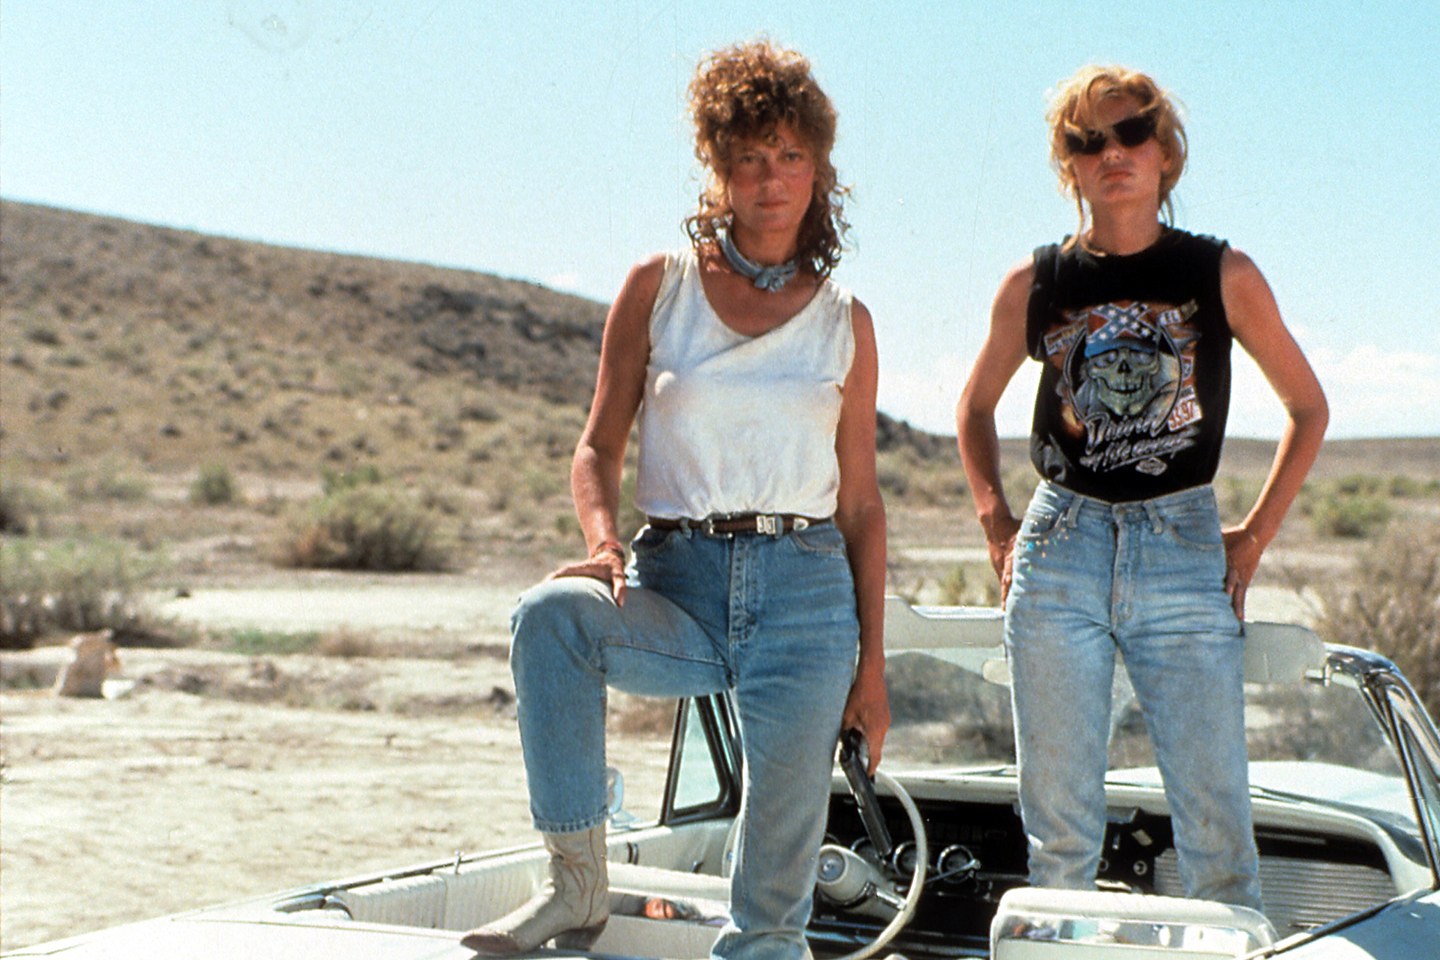 Thelma and Louise, Thelma & Louise (1991)